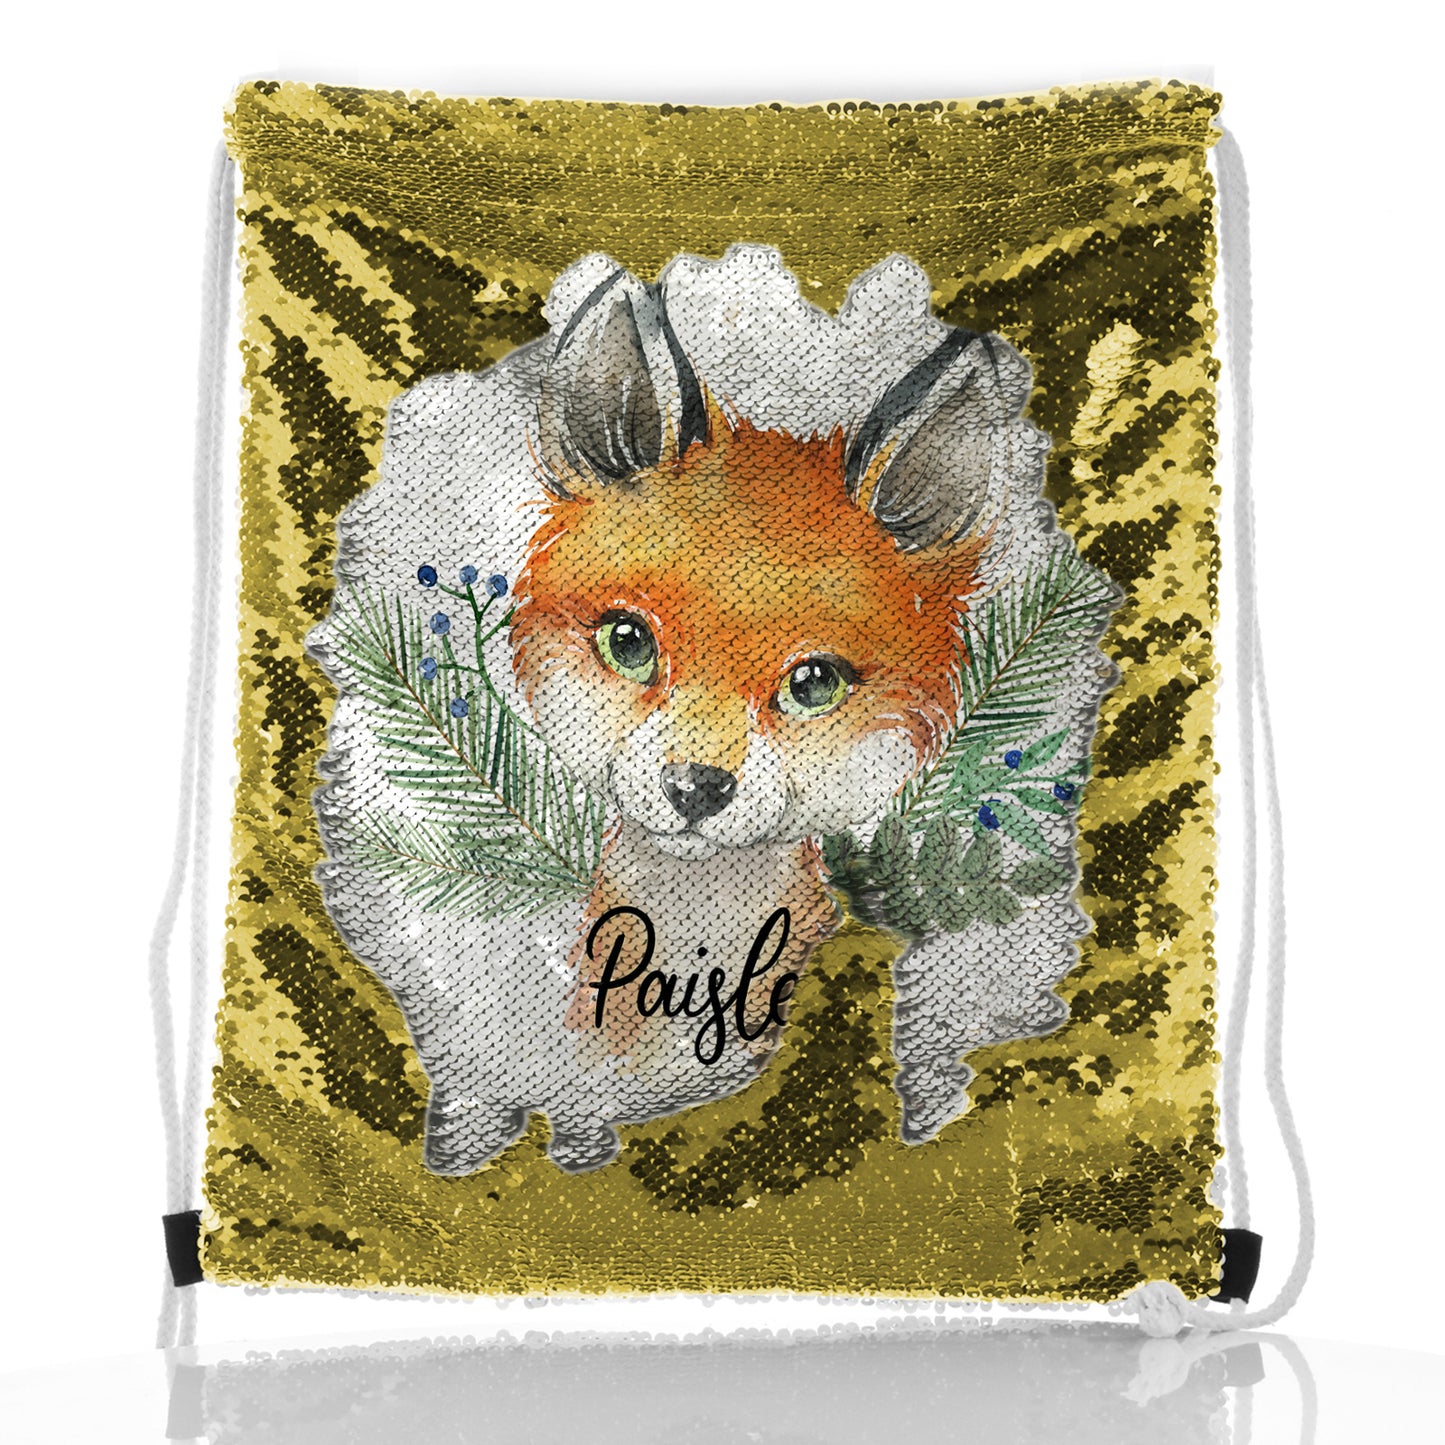 Personalised Sequin Drawstring Backpack with Red Fox Blue Berries and Cute Text